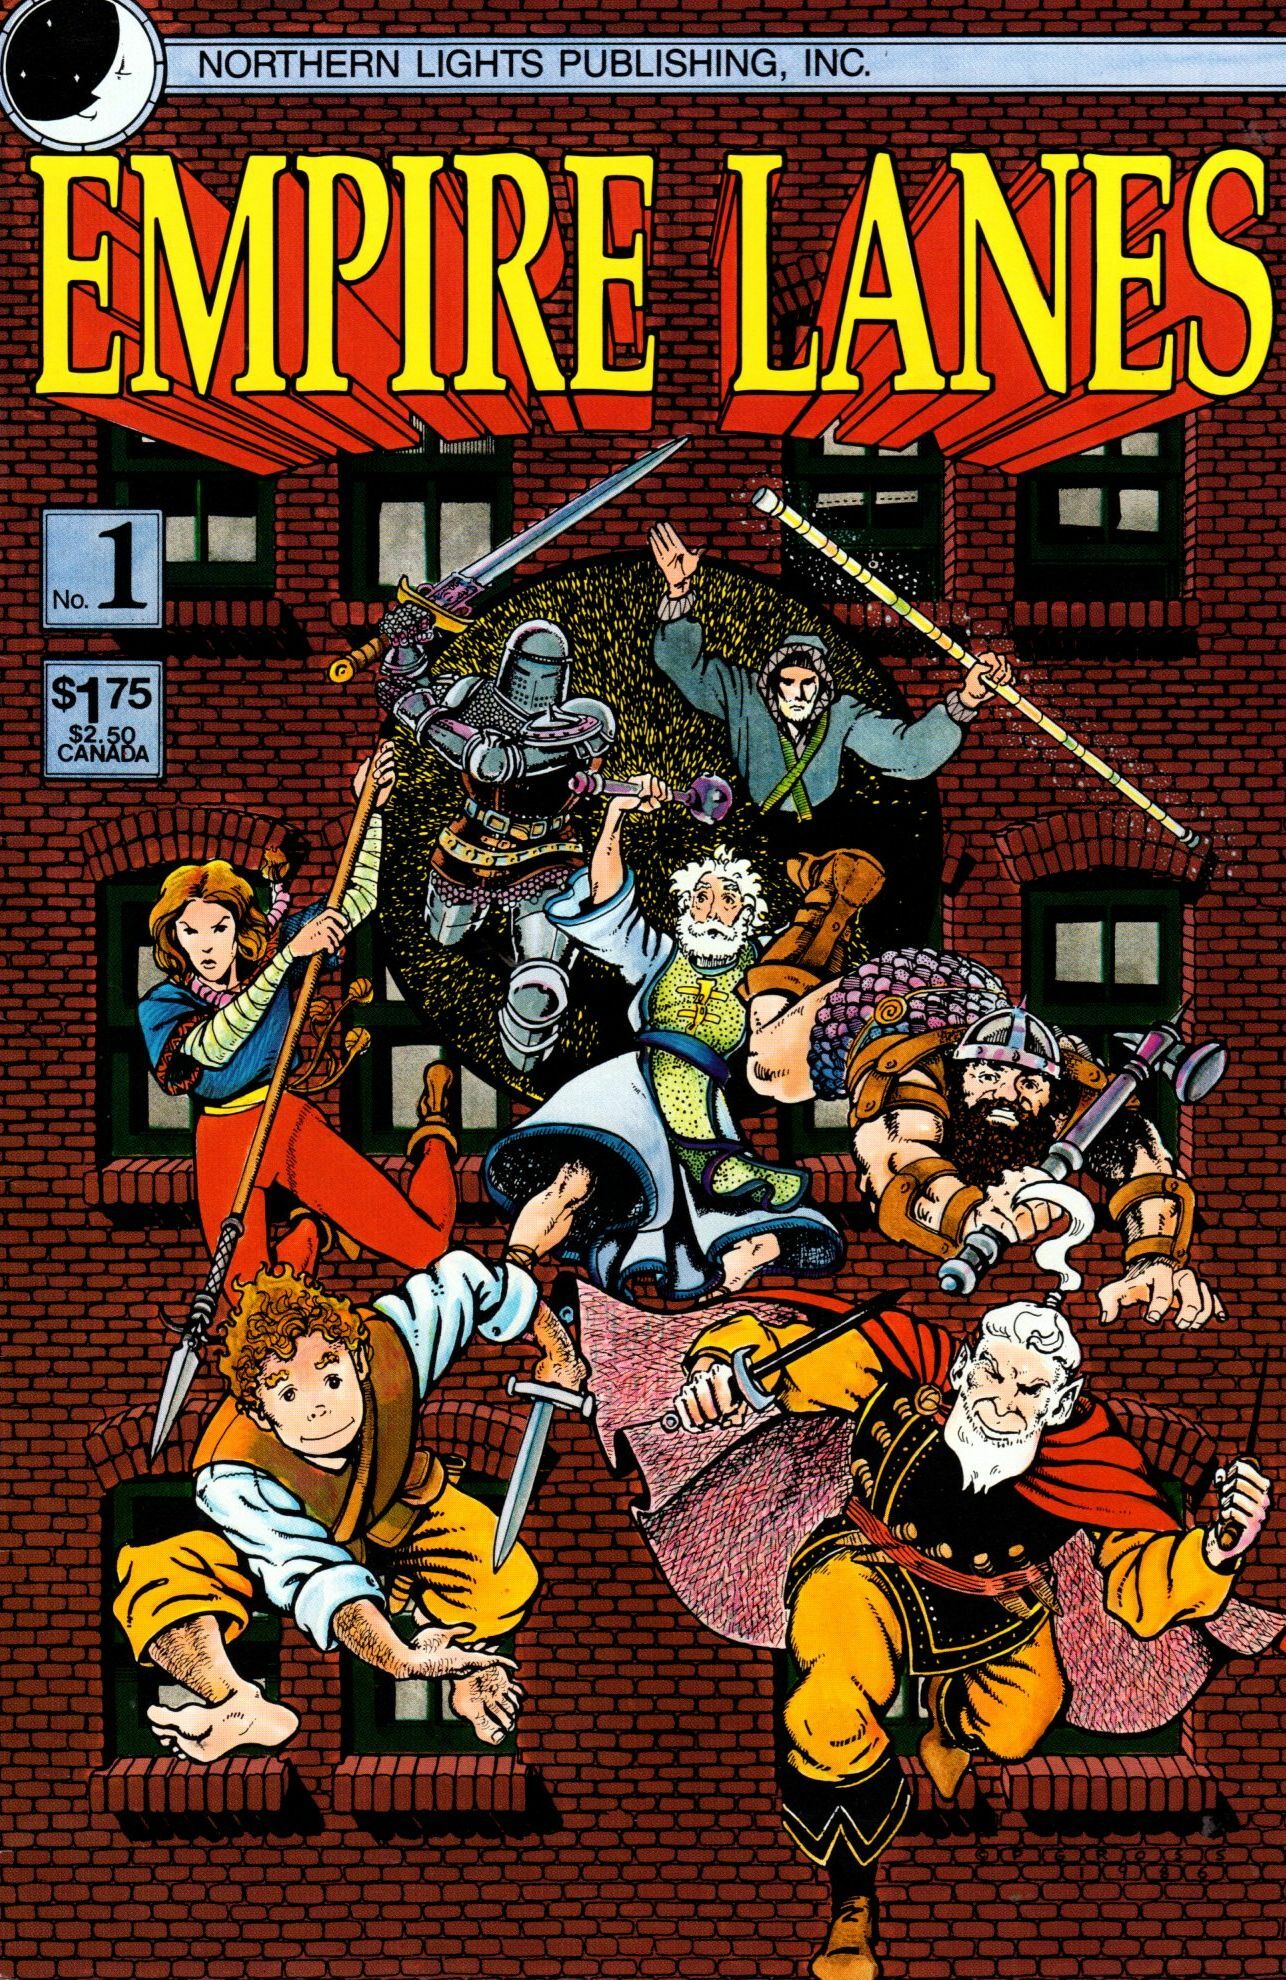 EMPIRE LANES:  THE ARRIVAL